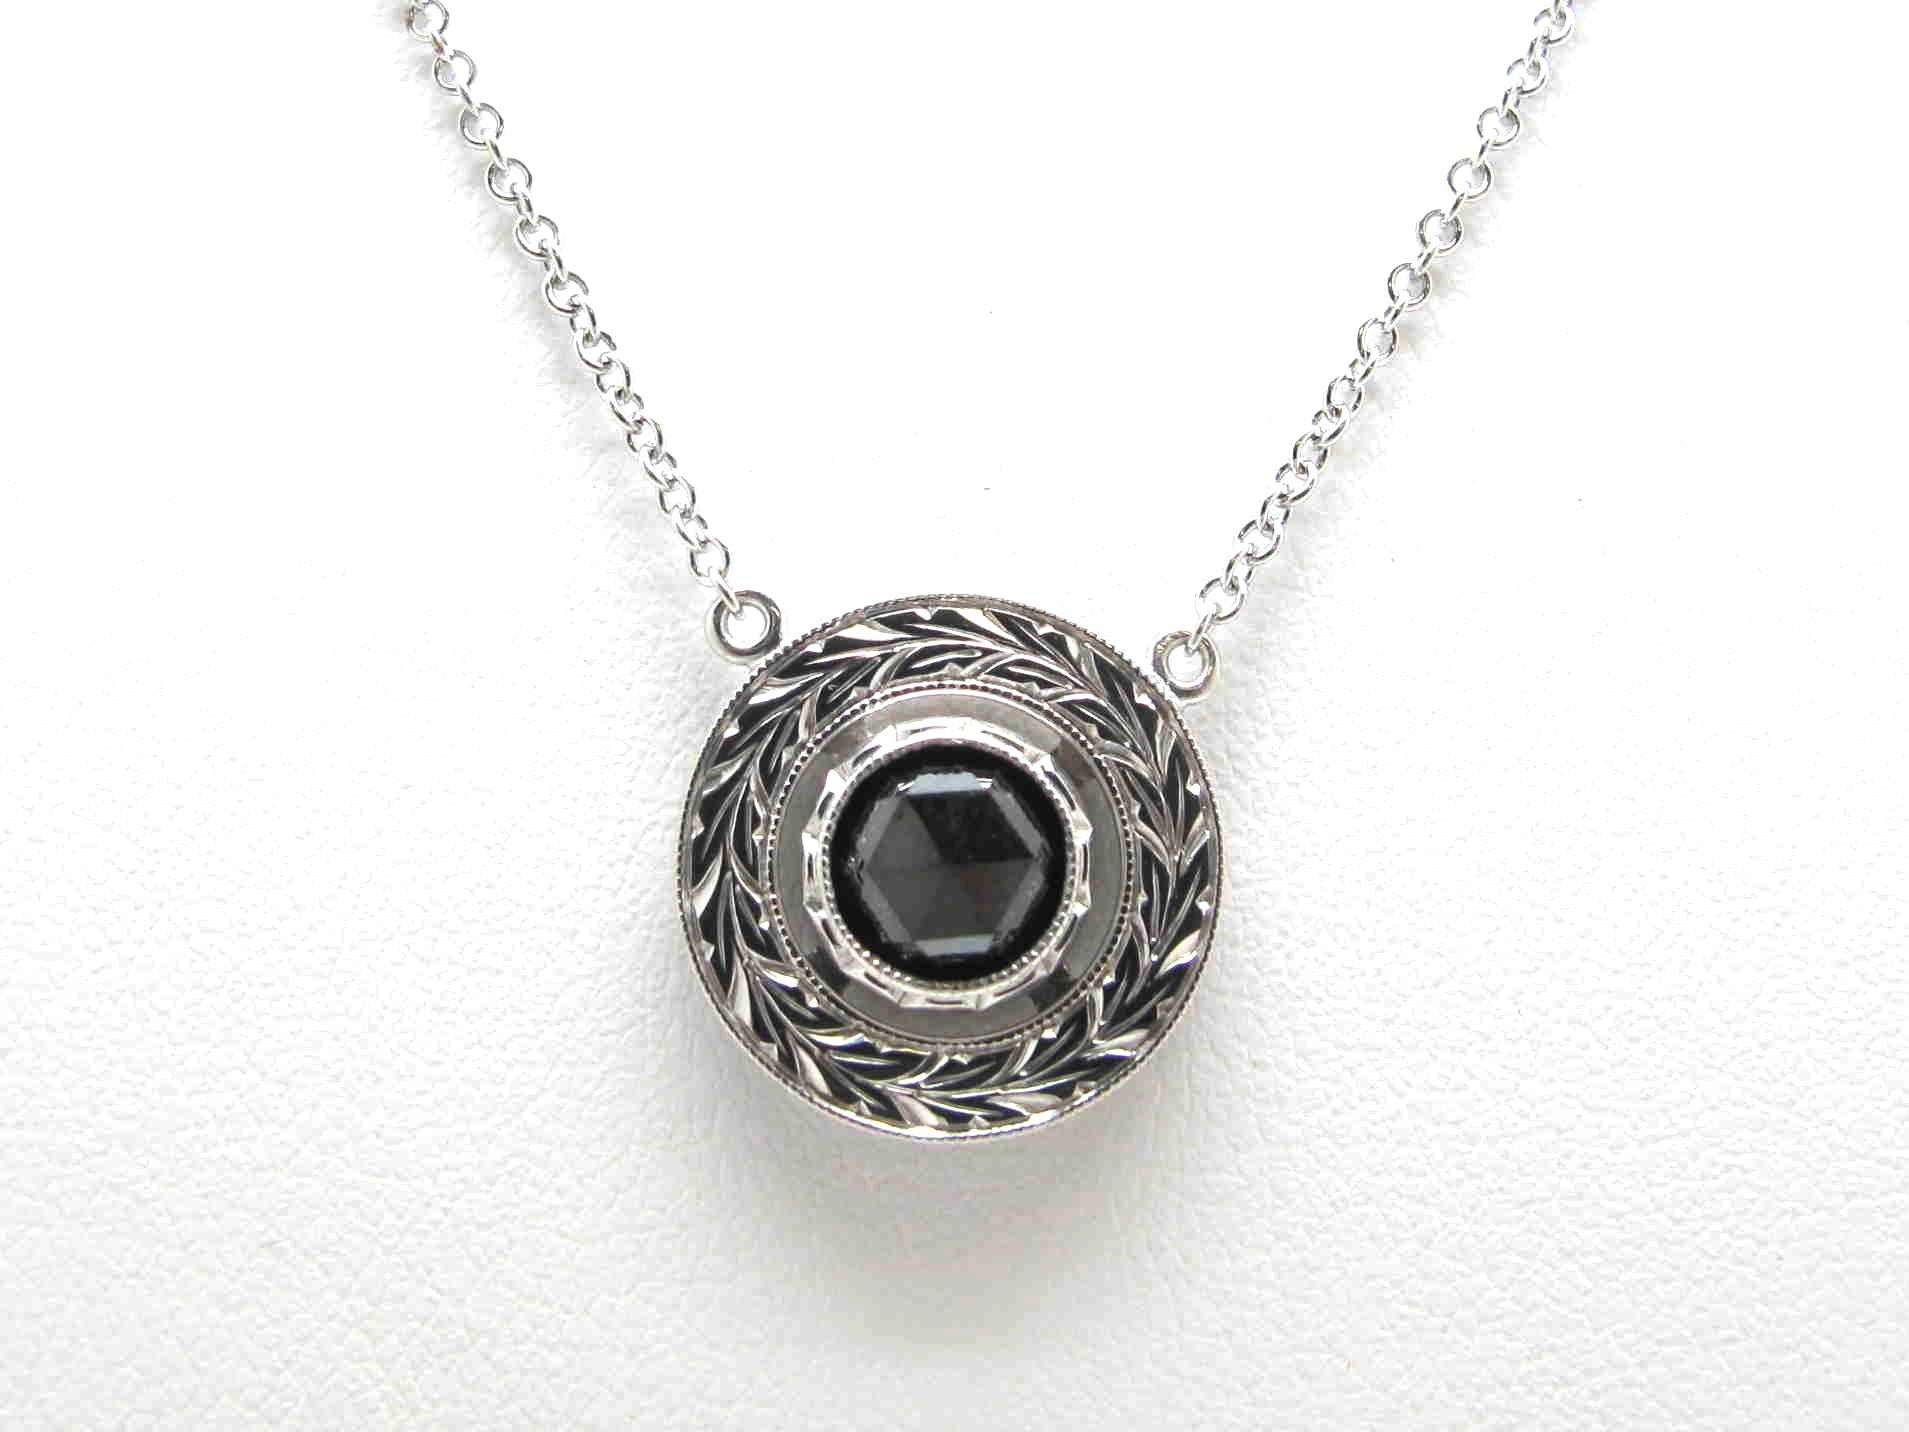 This dramatic rose cut black diamond and white gold necklace will have you ready for any occasion! The black diamond is set in a beautiful 18k white gold, hand engraved bezel as part of our signature Day and Night Collection. Handcrafted by our